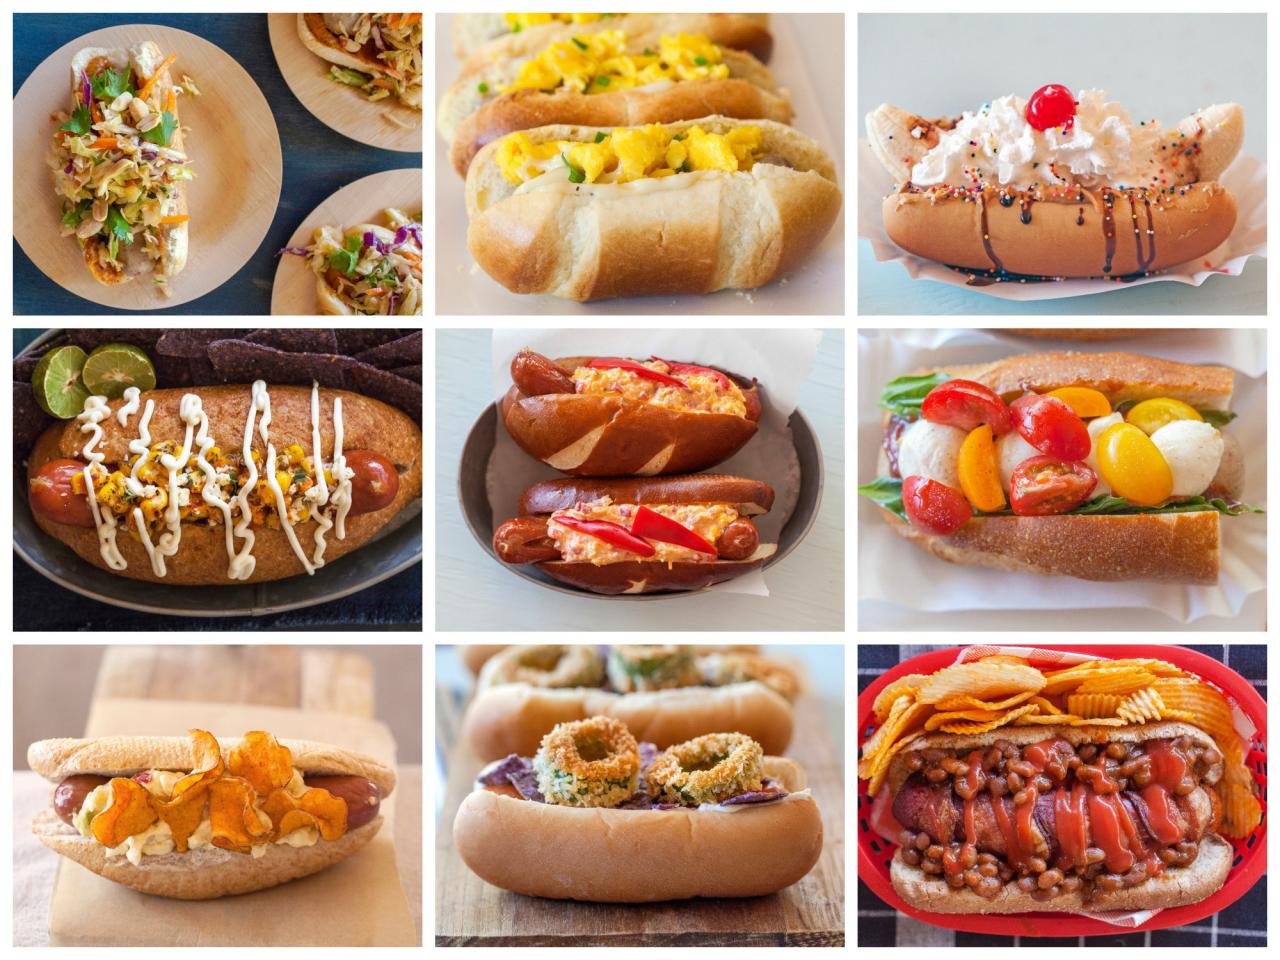 17 Gourmet Hot Dog Recipes w/ Fun Toppings for Your Next Party - Sip Bite Go